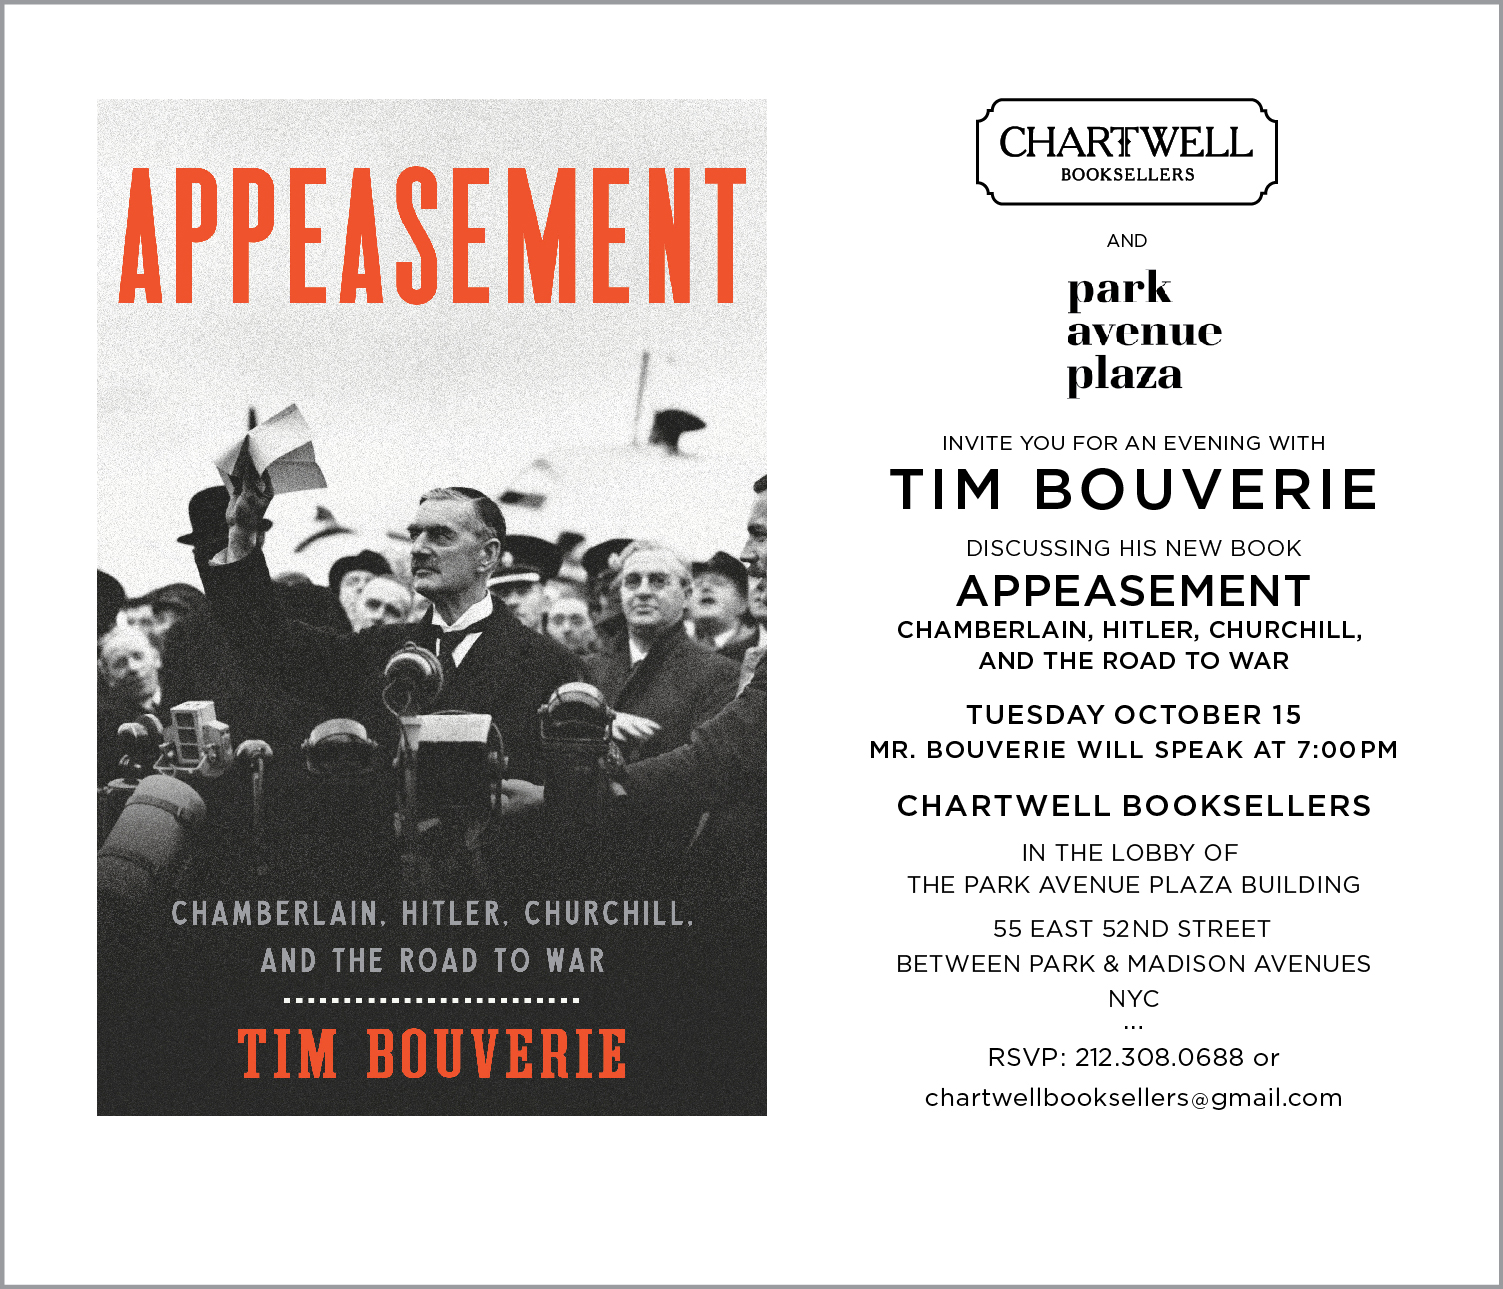 “APPEASEMENT:” AN EVENING WITH TIM BOUVERIE